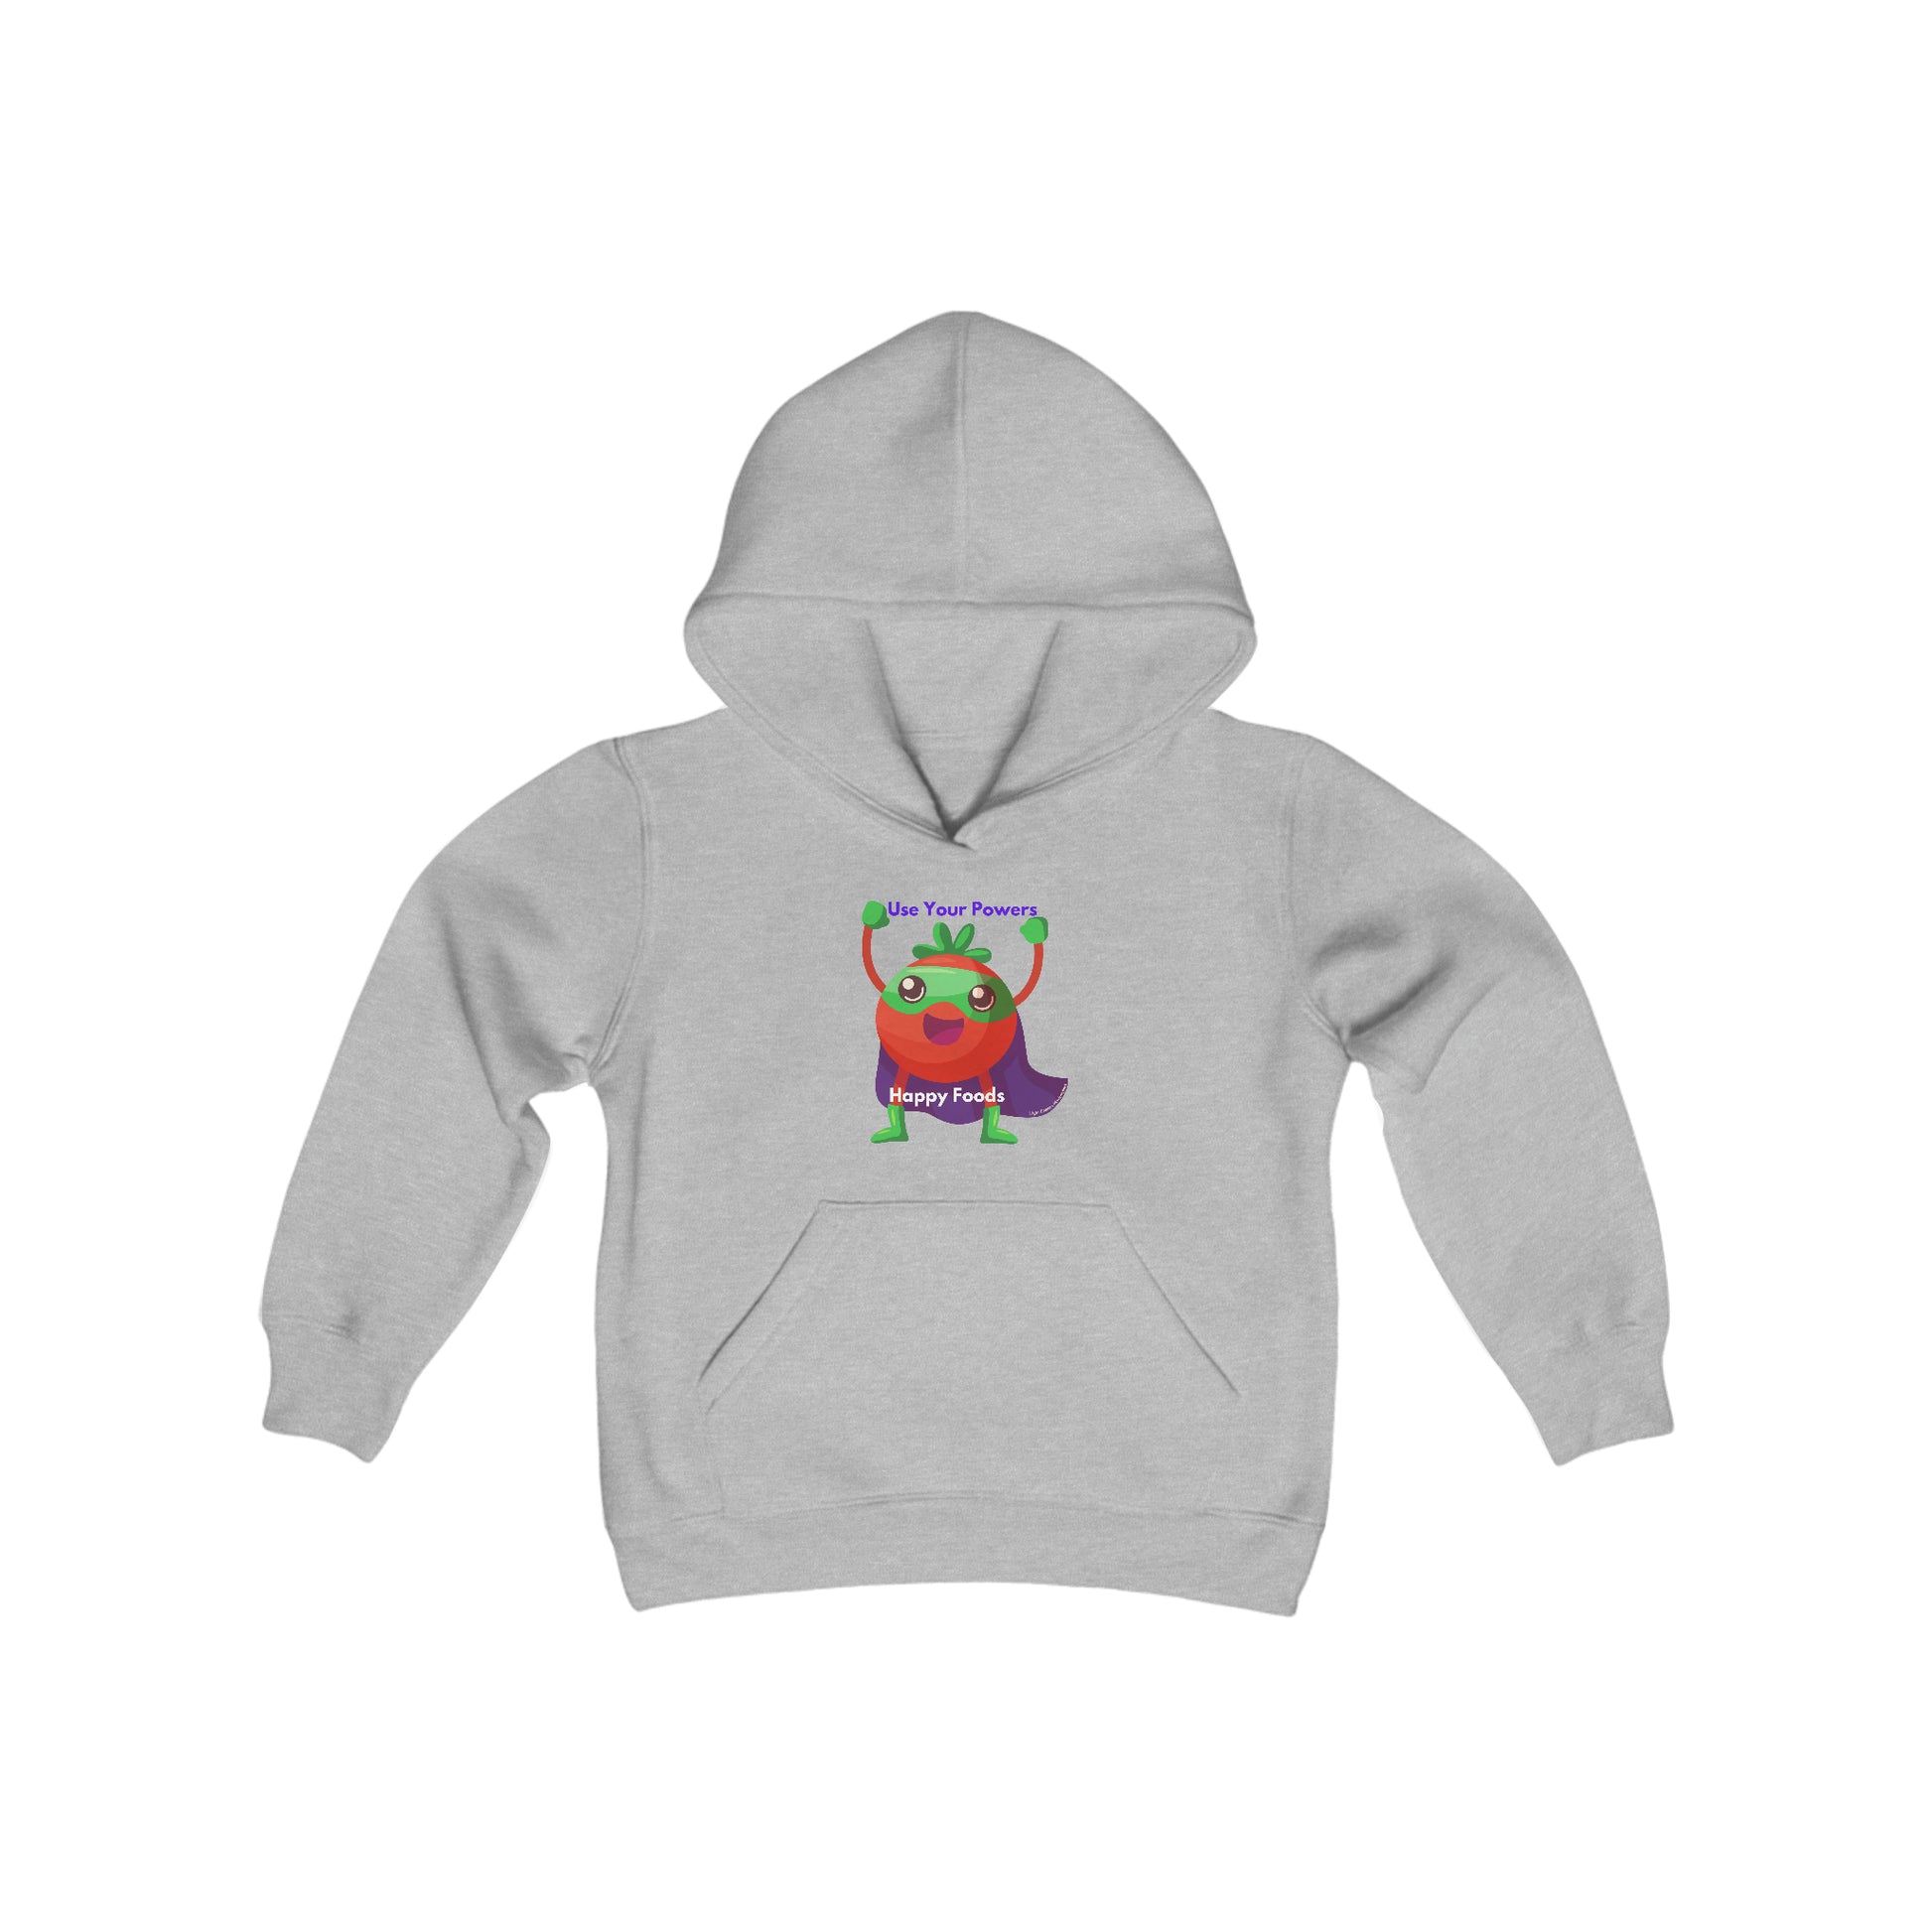 Youth hoodie featuring a grey sweatshirt with a cartoon character, Tomato Power Happy Food design. Kangaroo pocket, 50% cotton 50% polyester blend, soft fleece, twill taping, regular fit.